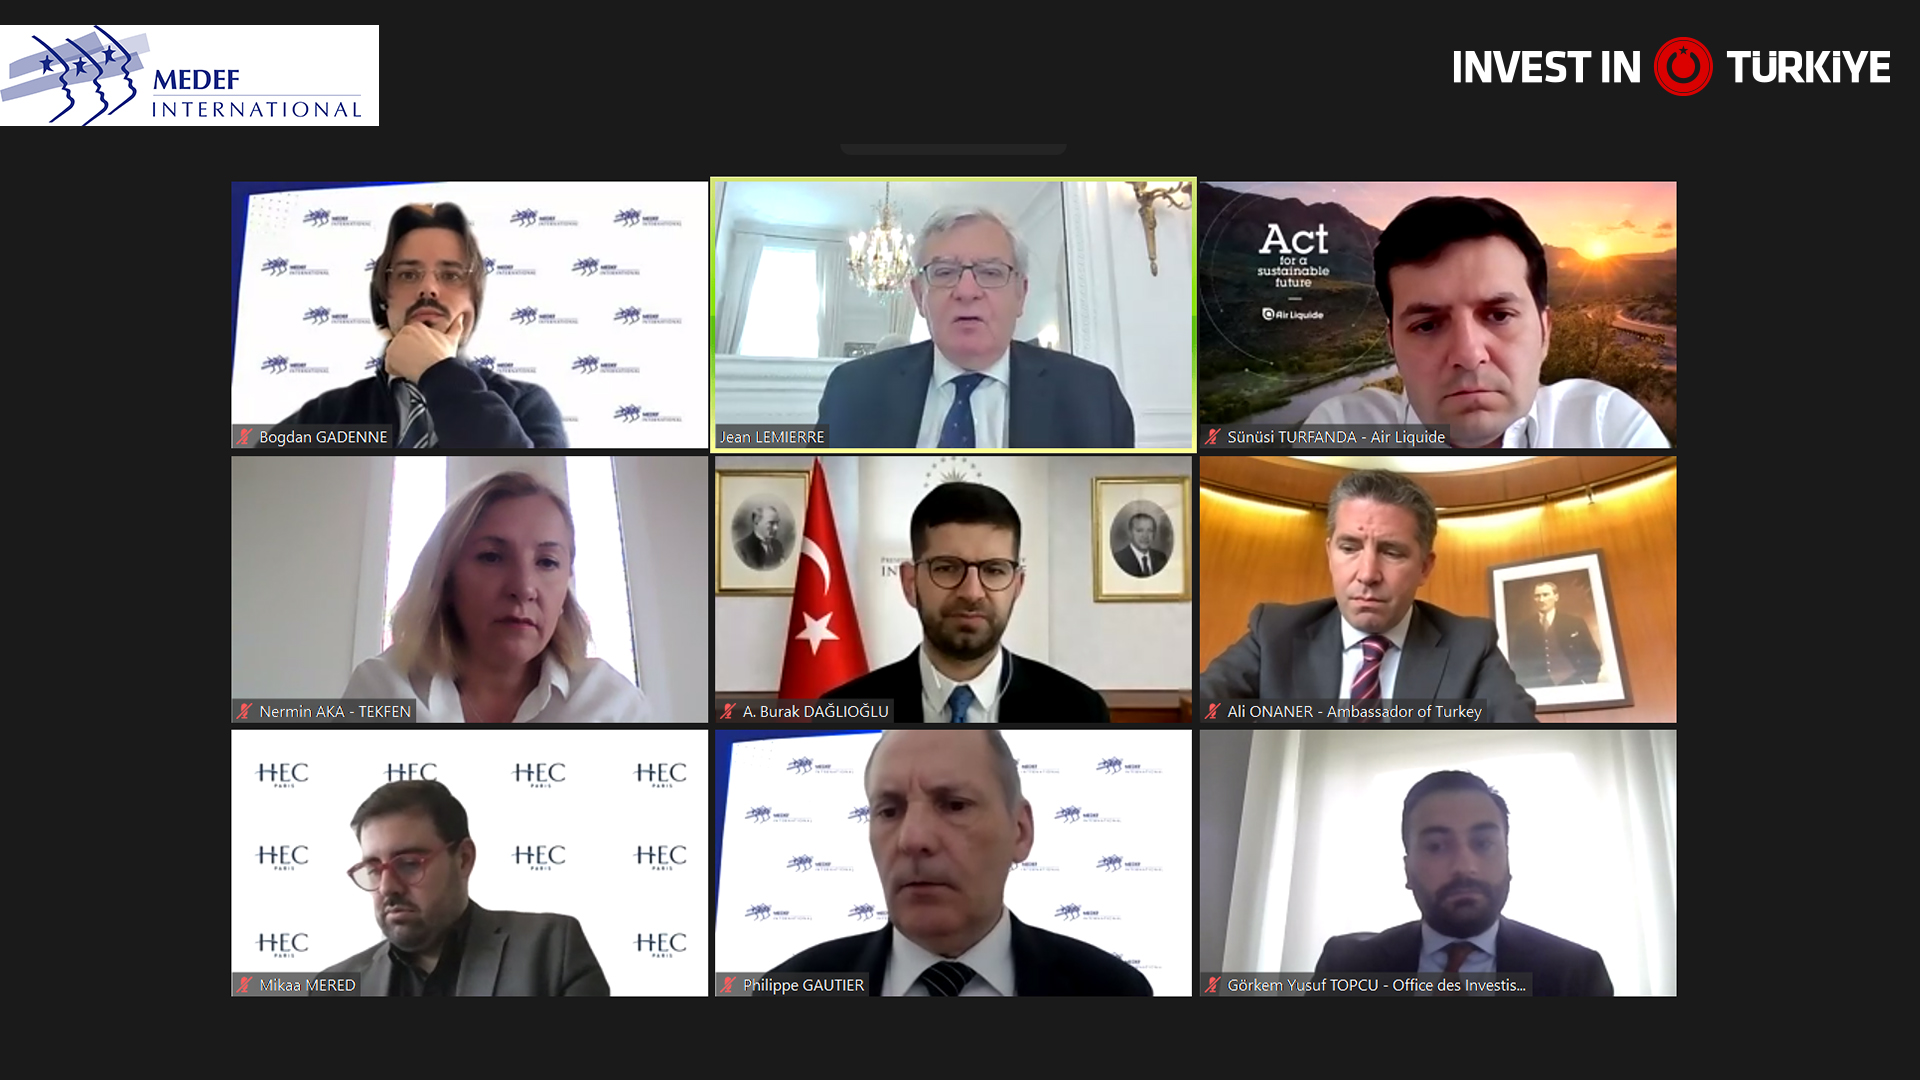 Image of Webinar with Investment Office and French MEDEF